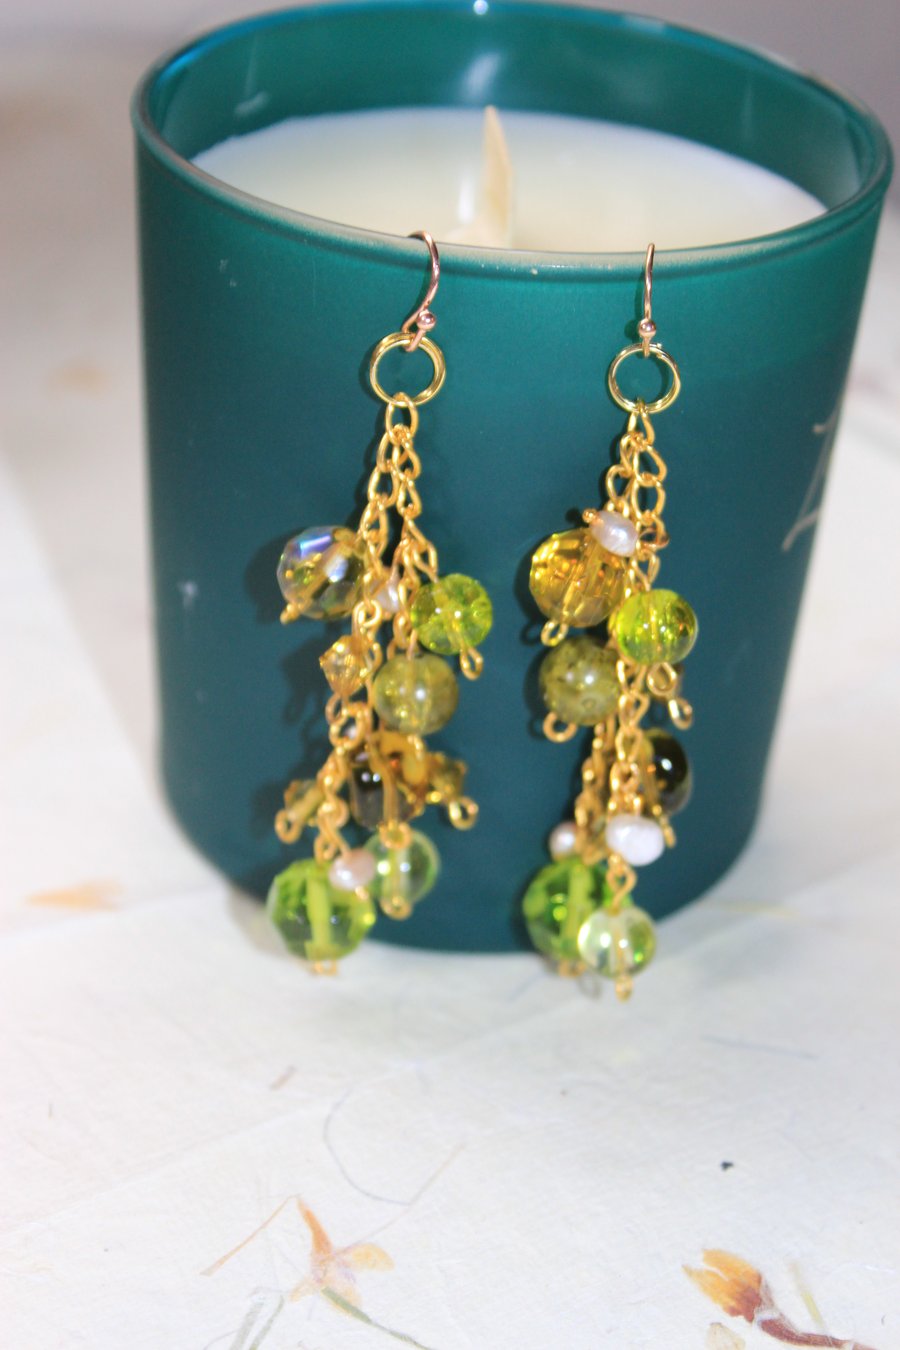 Beautiful green and gold chandelier earrings.